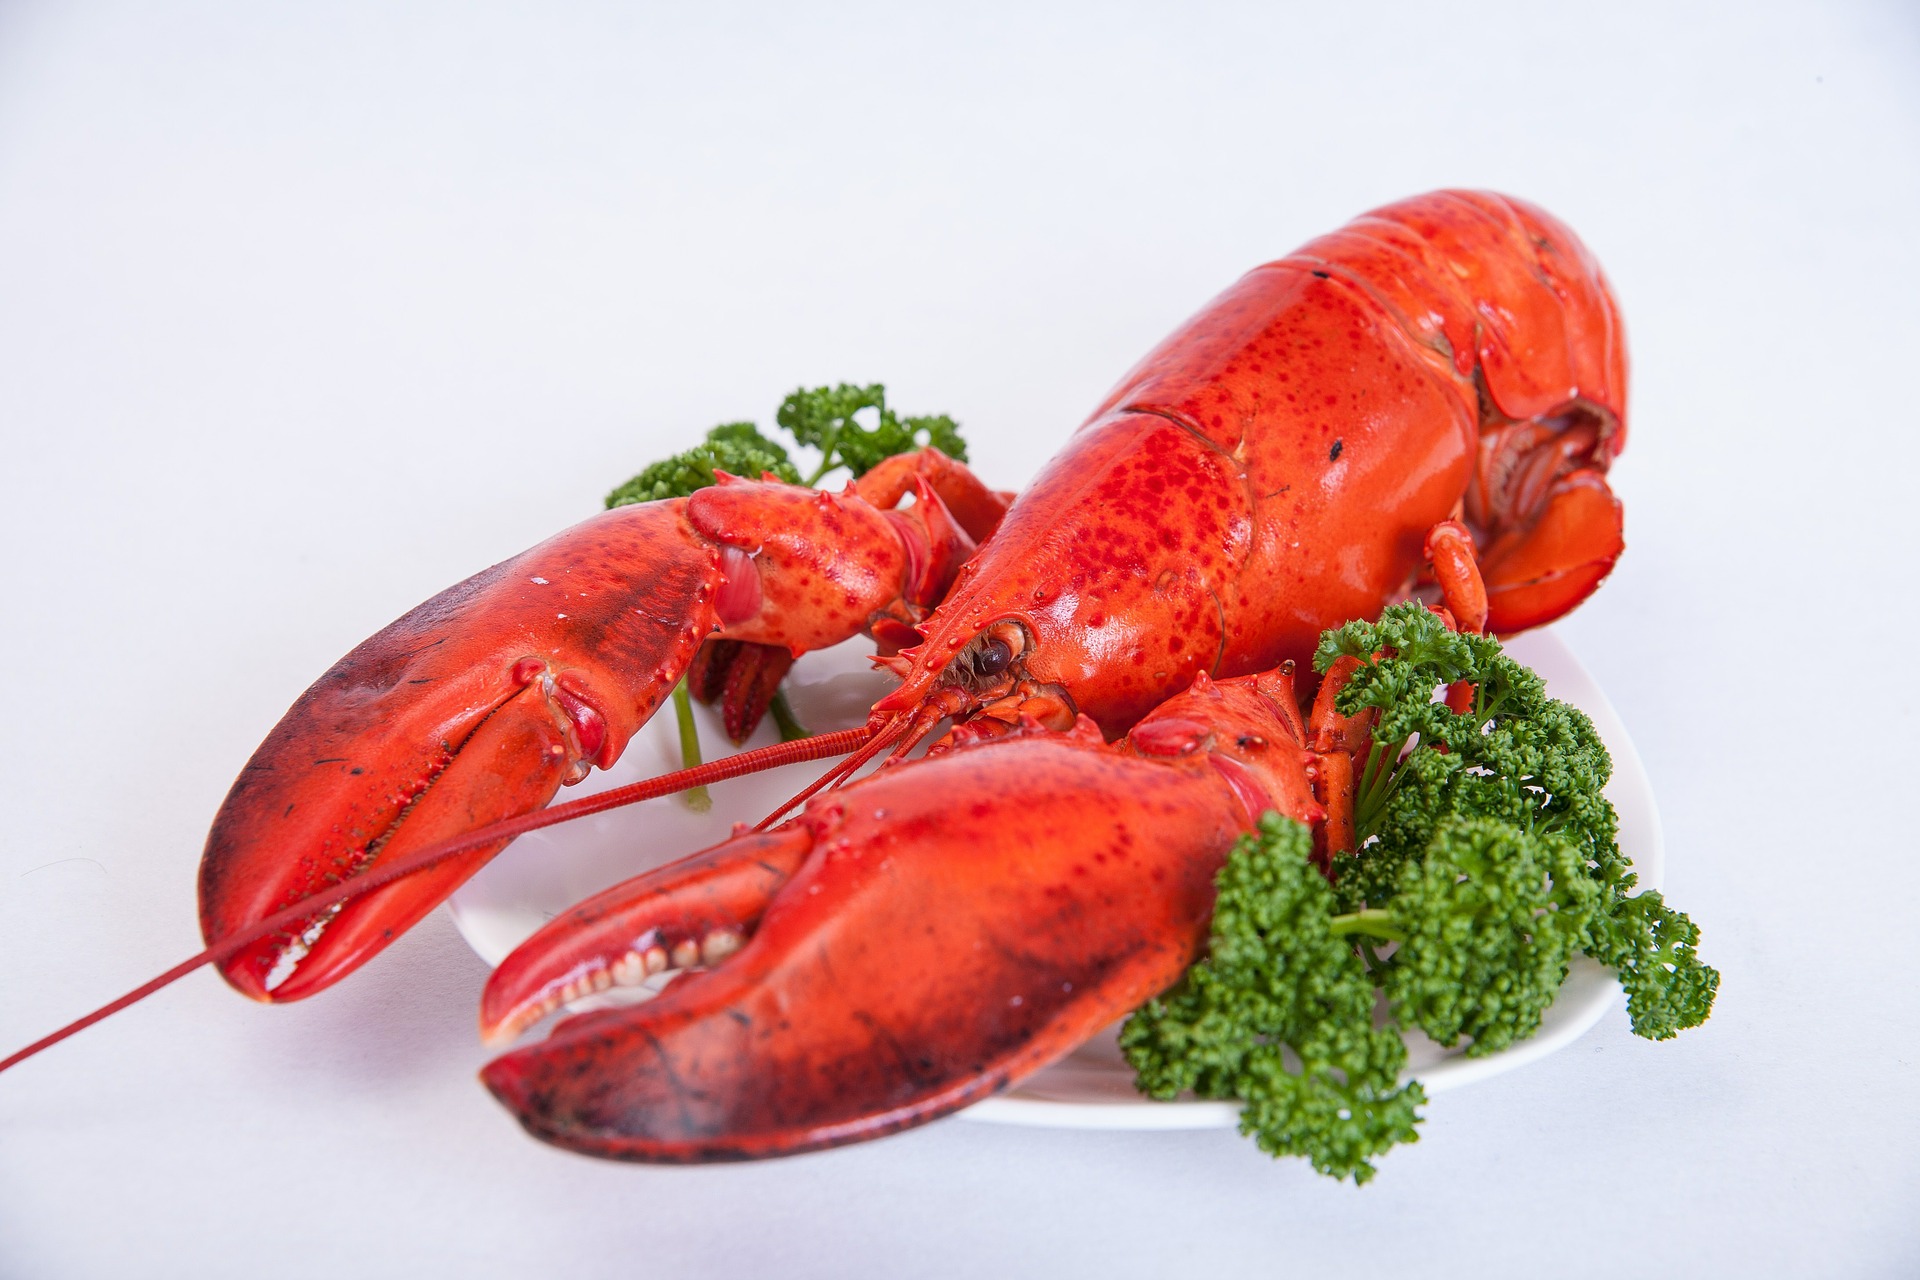 What seafood can be eaten safely during pregnancy? • Montreal Diet Dispensary